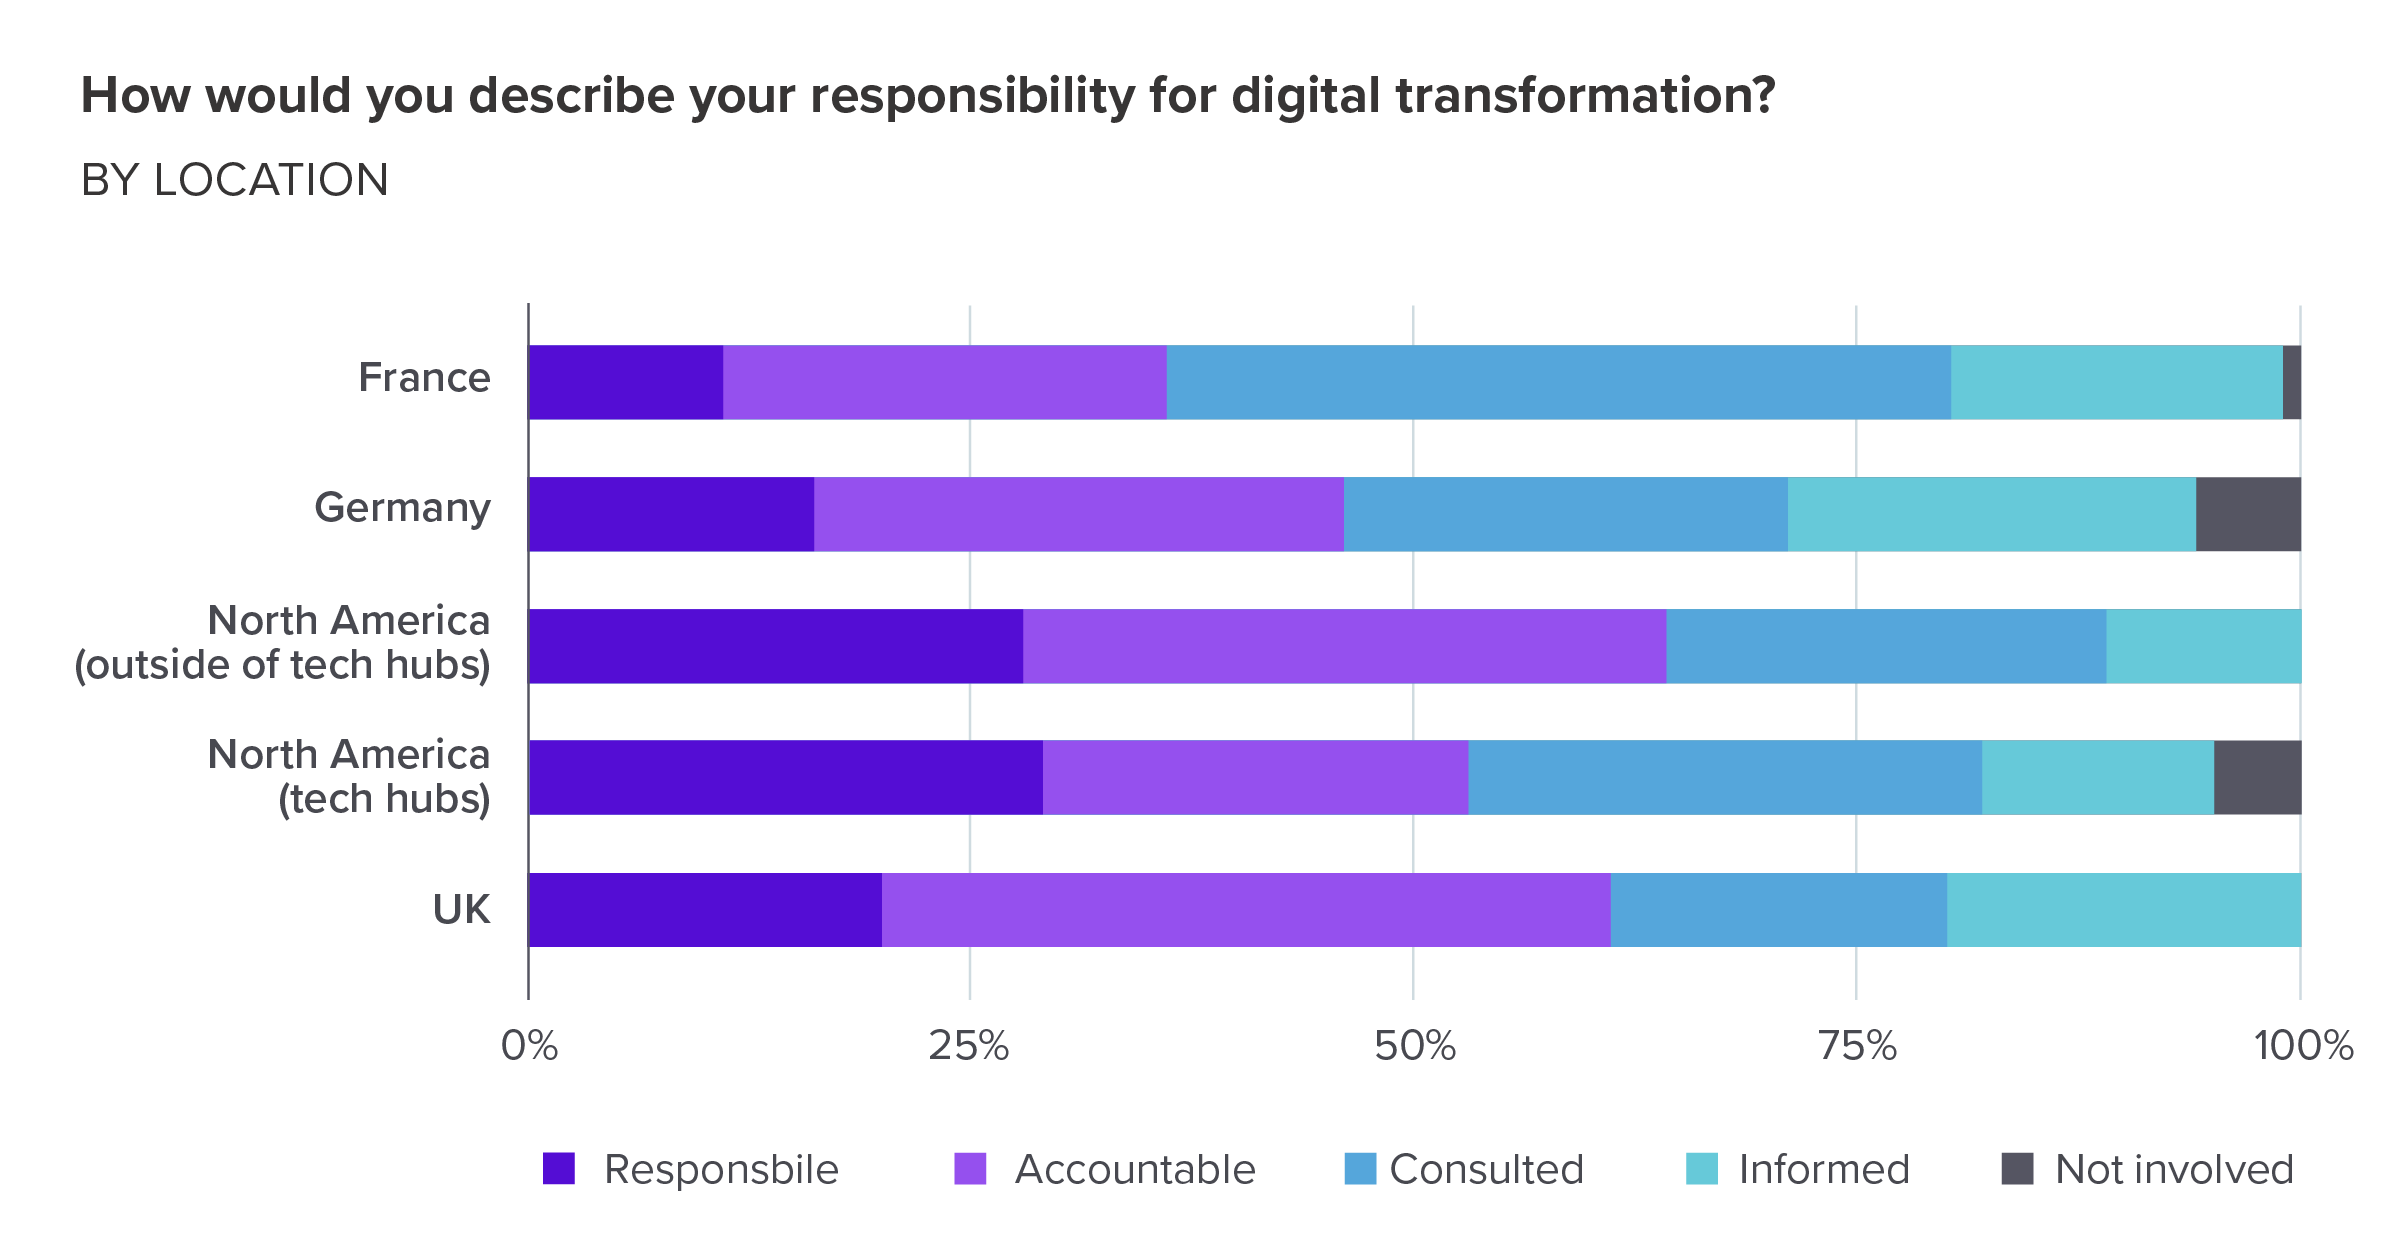 How would you describe your responsibility for digital transformation? By location